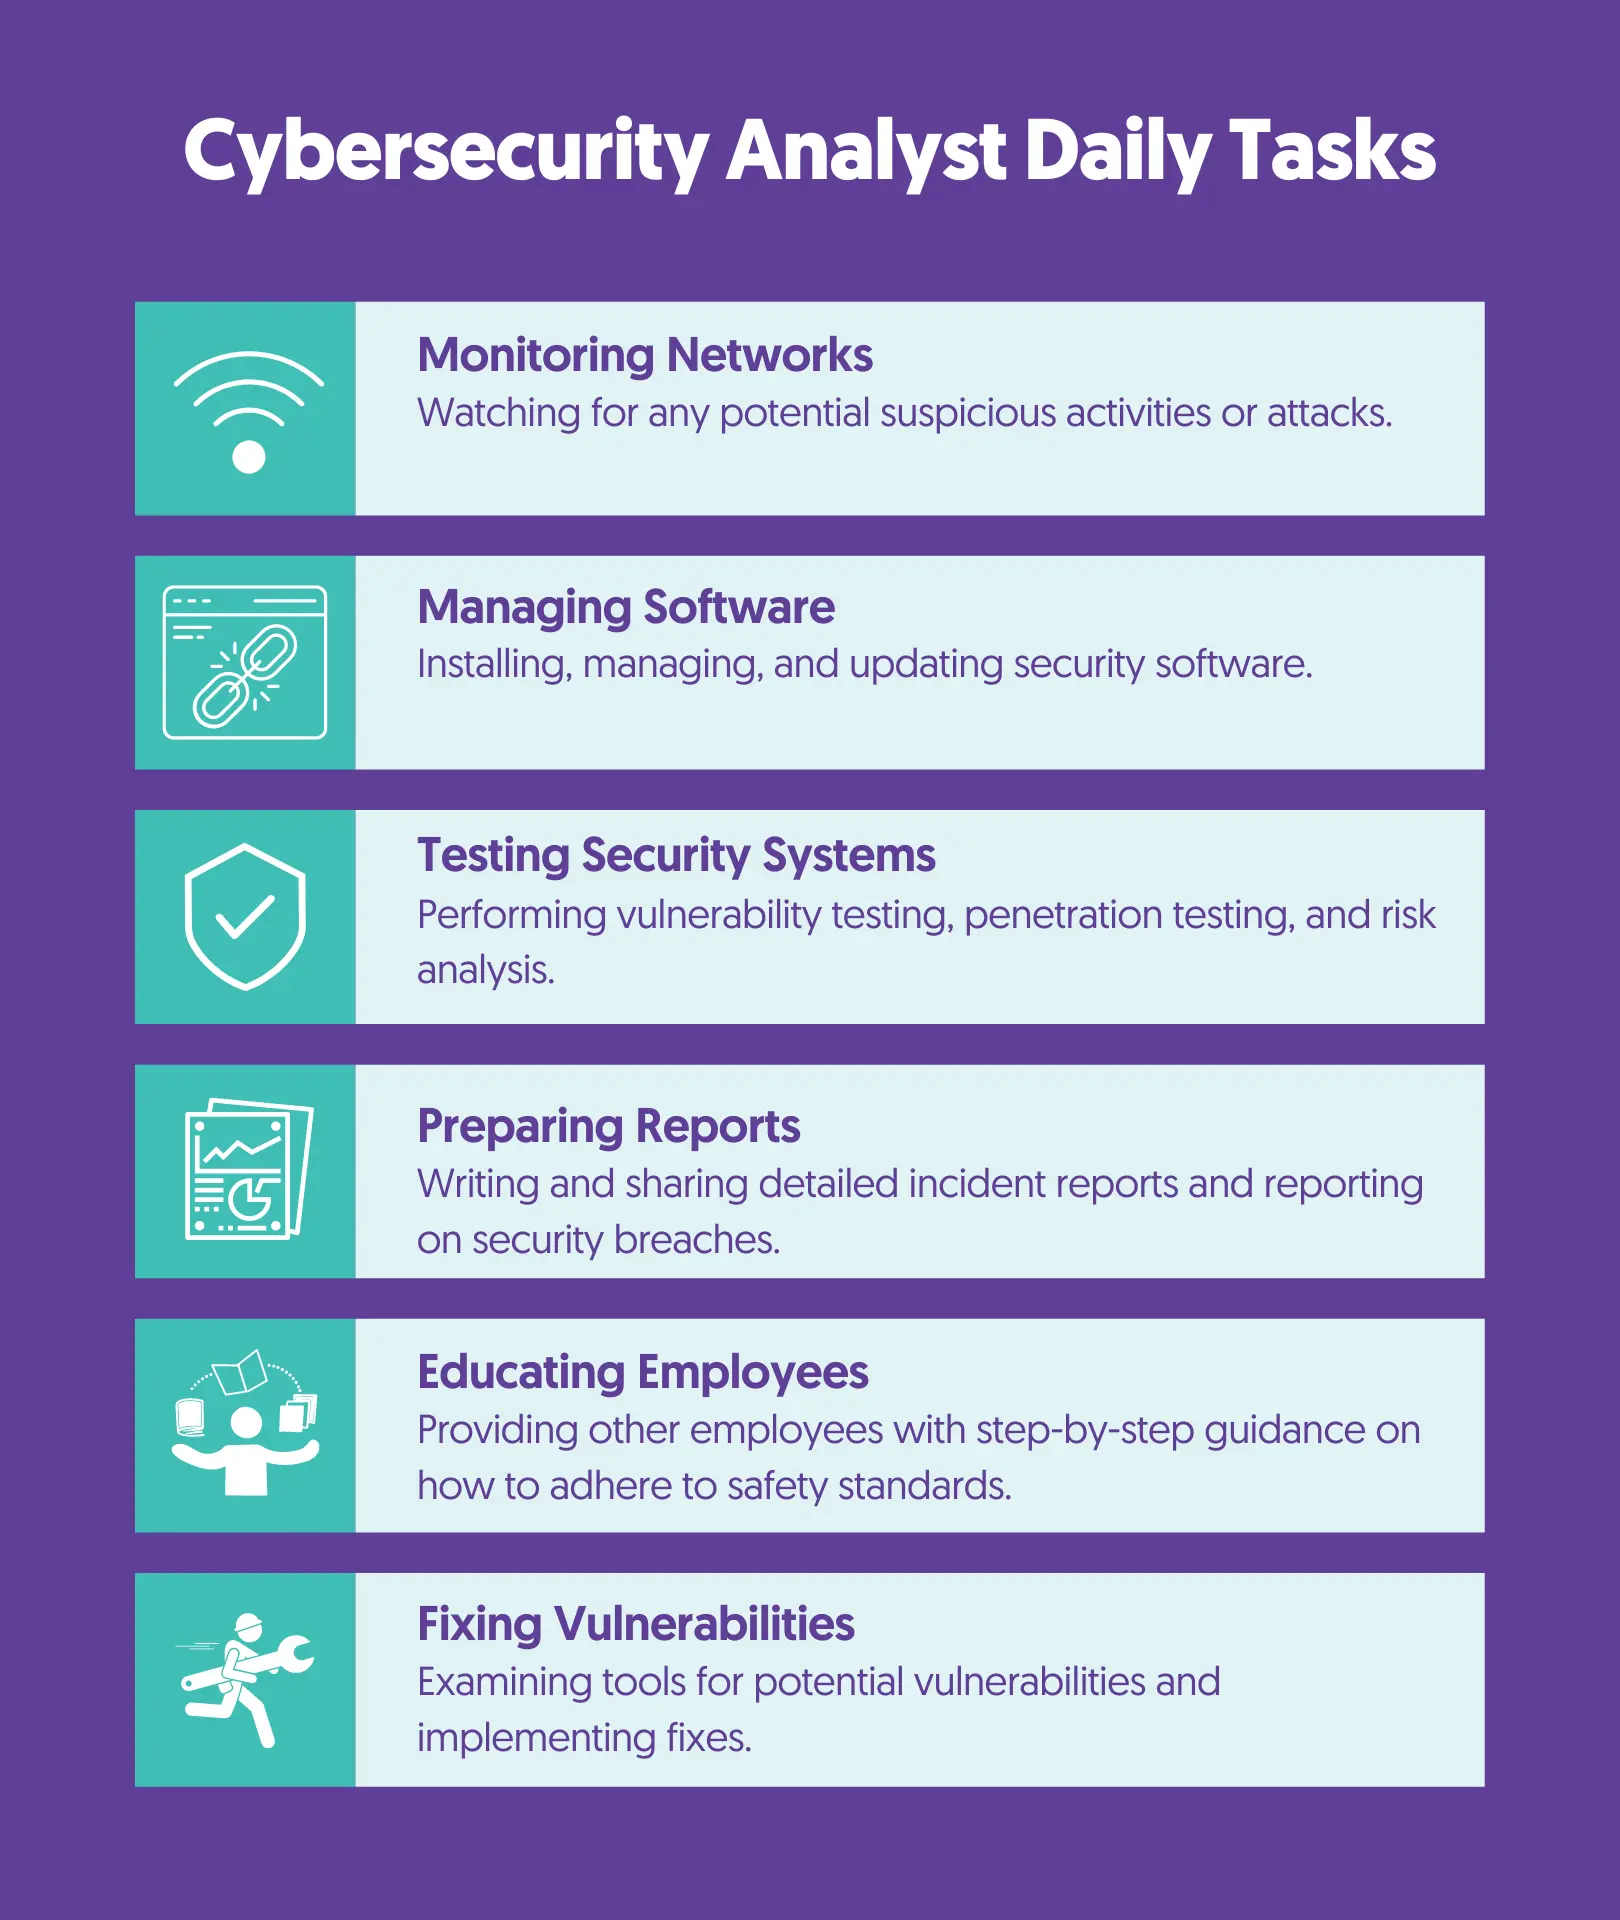 What Does a Cybersecurity Analyst Do?